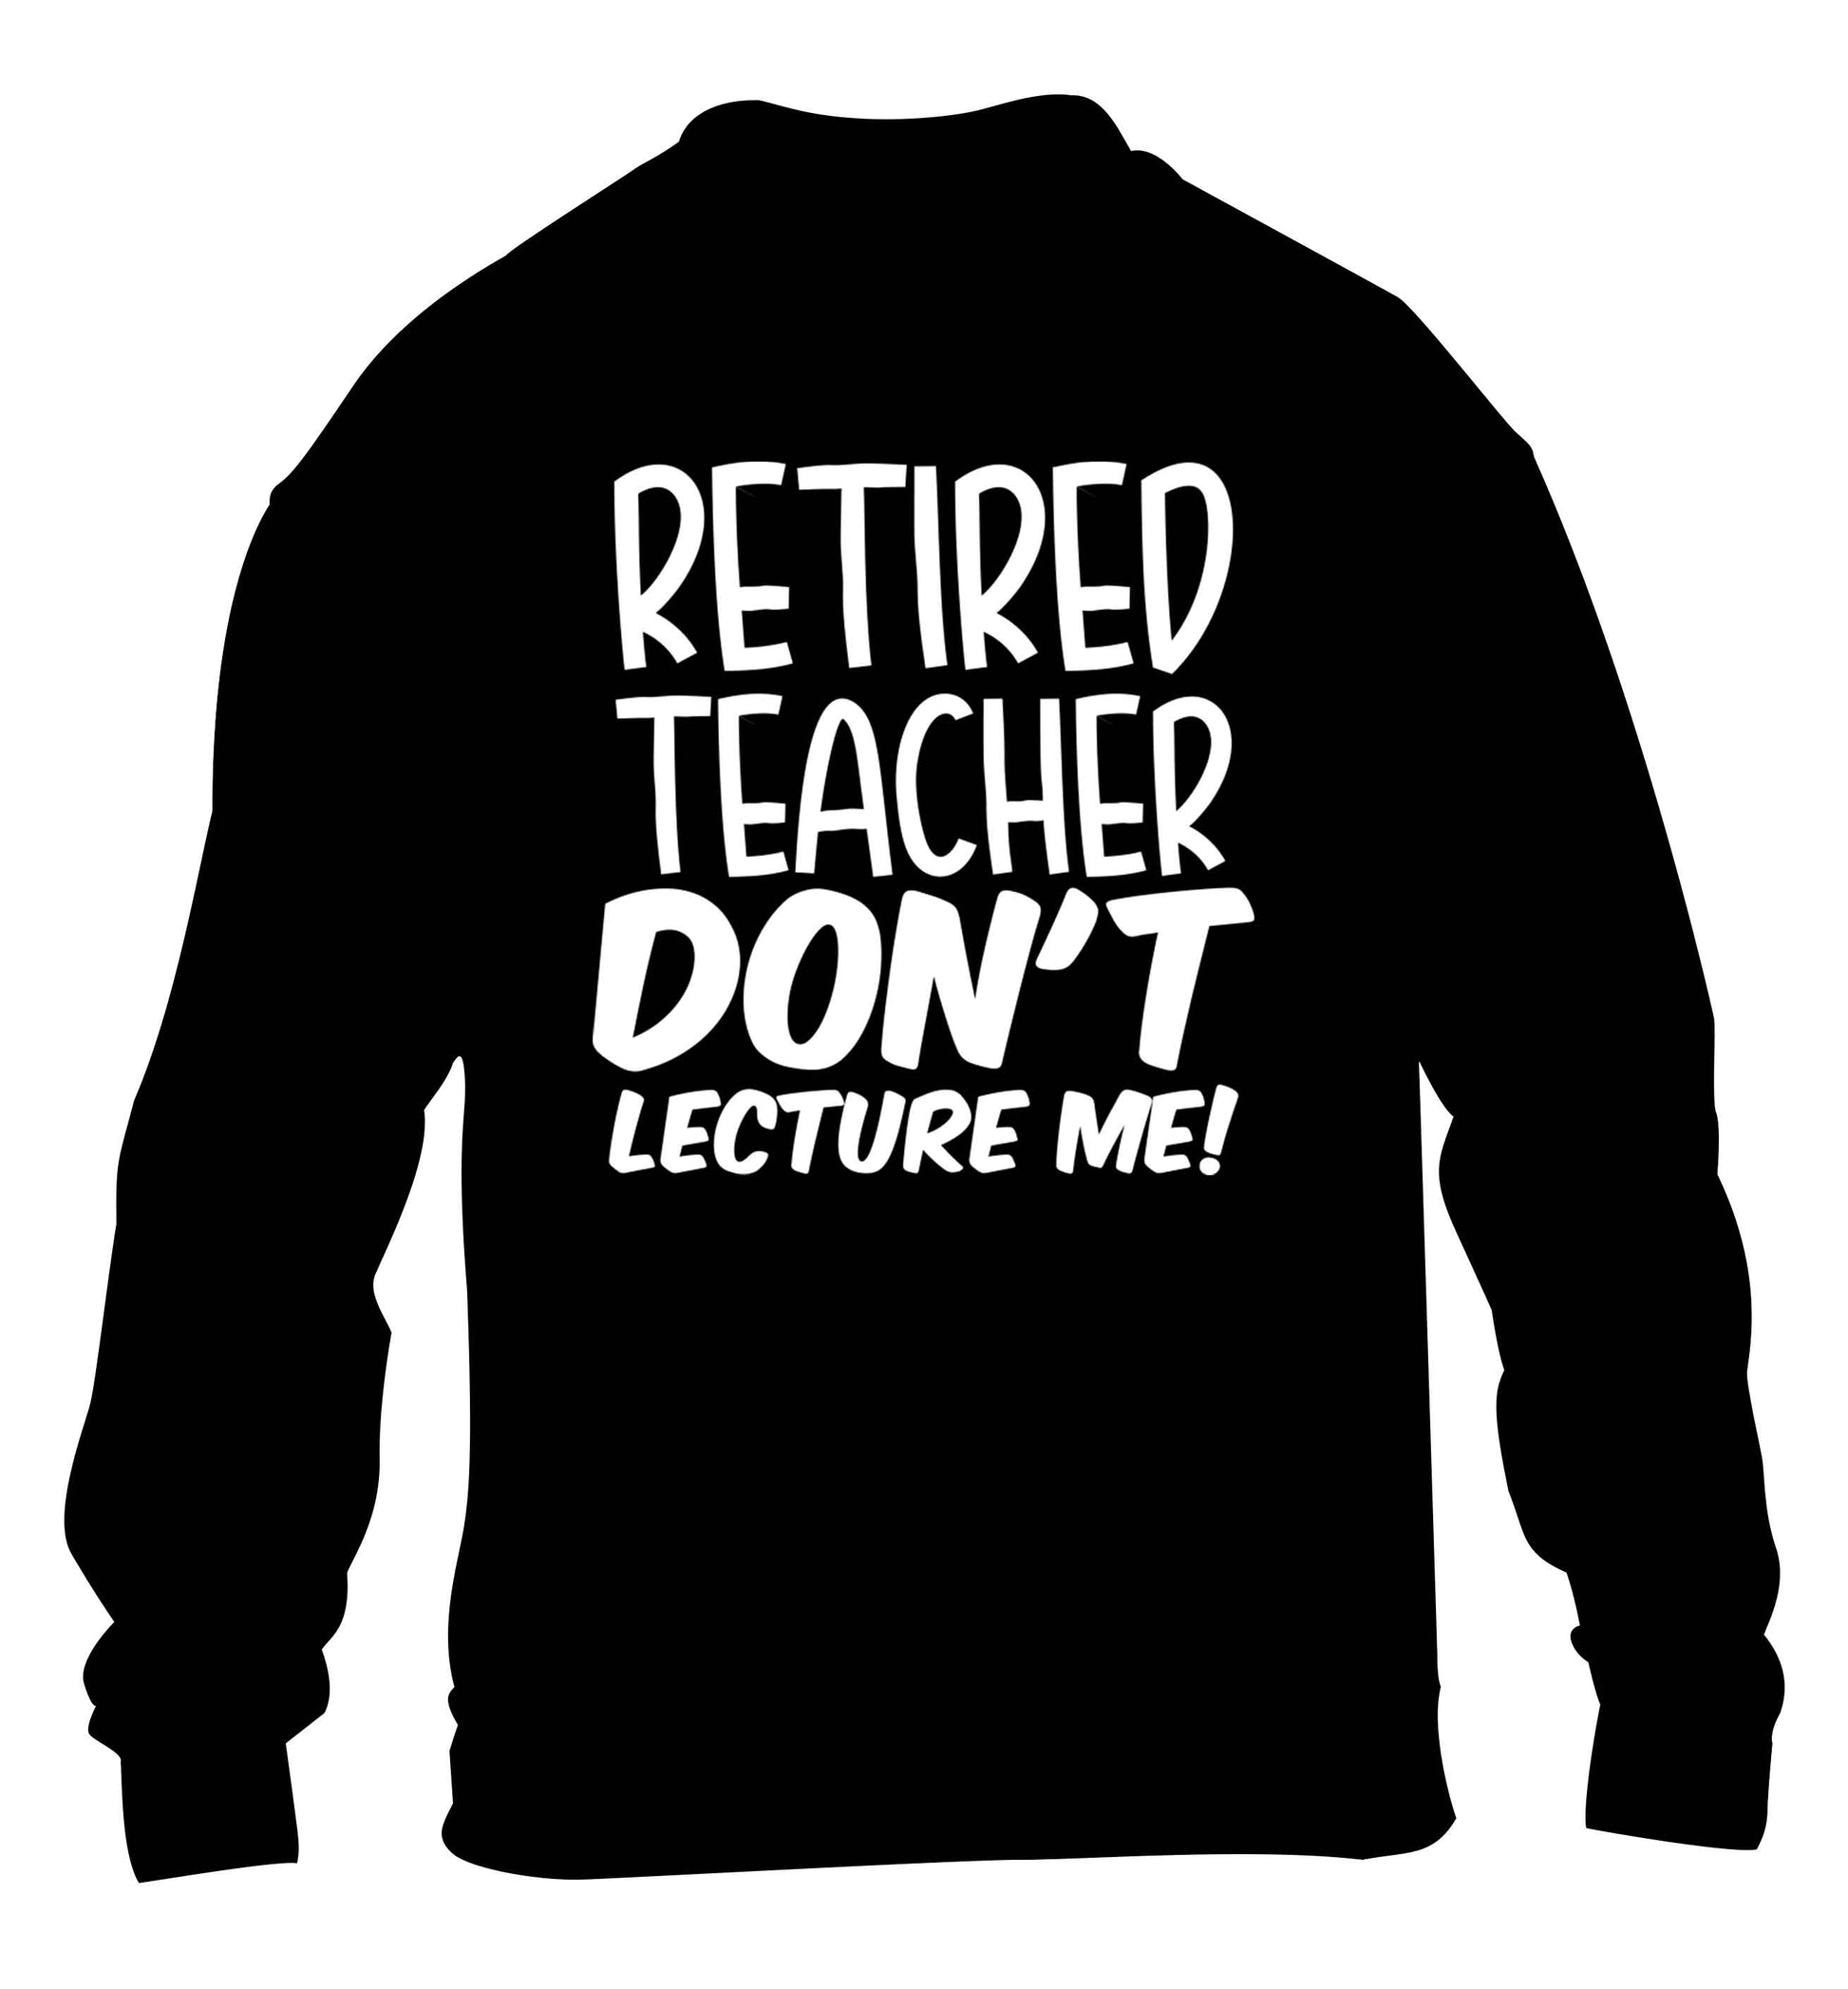 Retired teacher don't lecture me! children's black sweater 12-13 Years